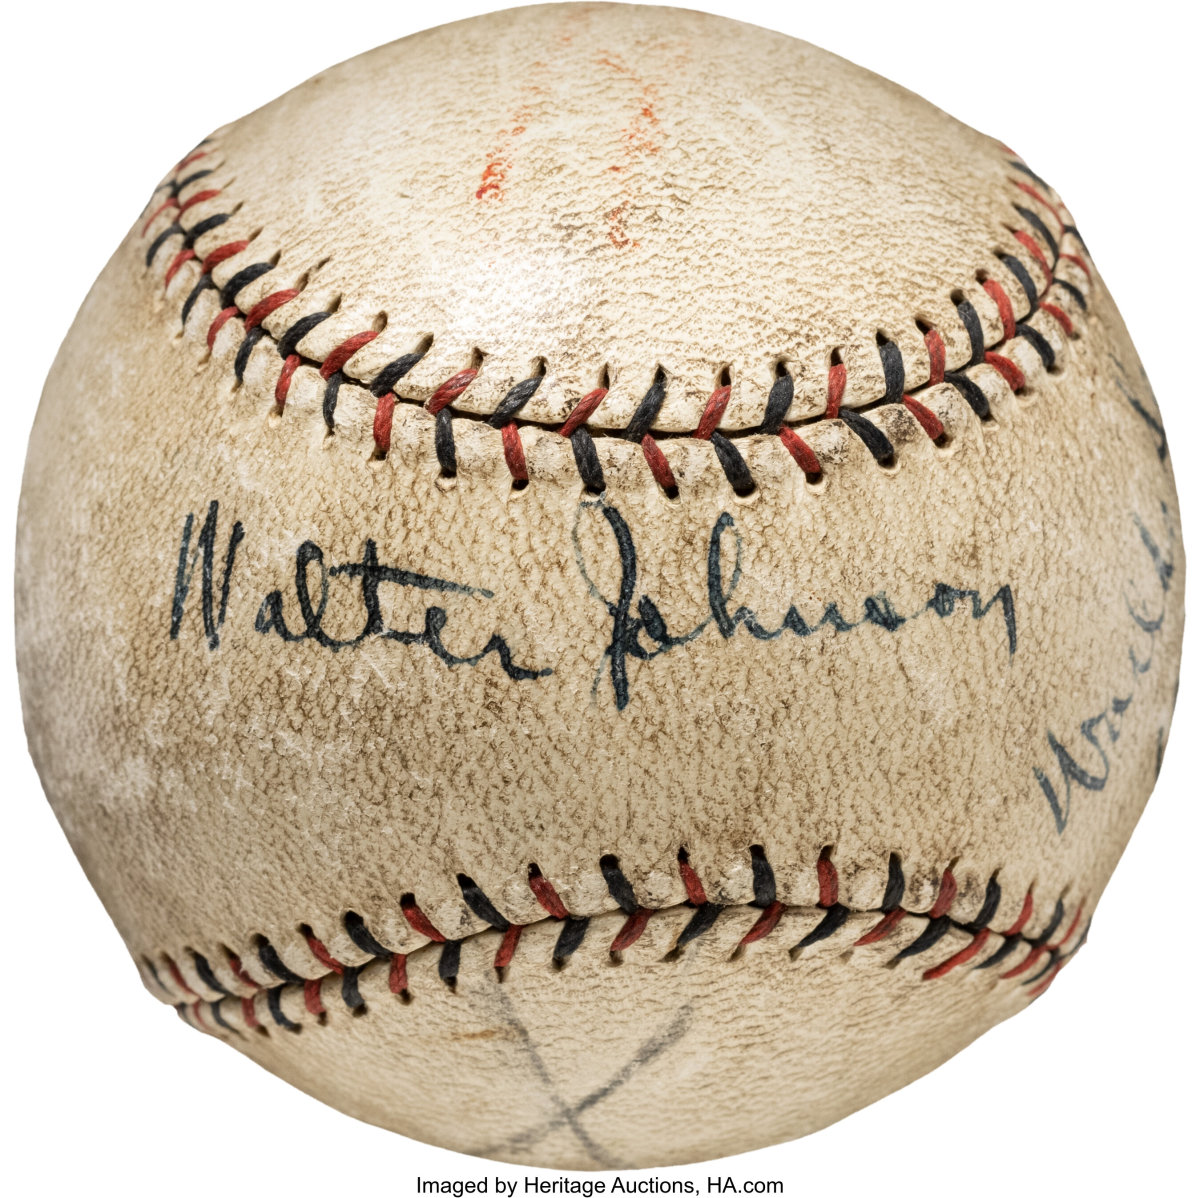 A game-used ball from the 1924 World Series signed by Walter Johnson.